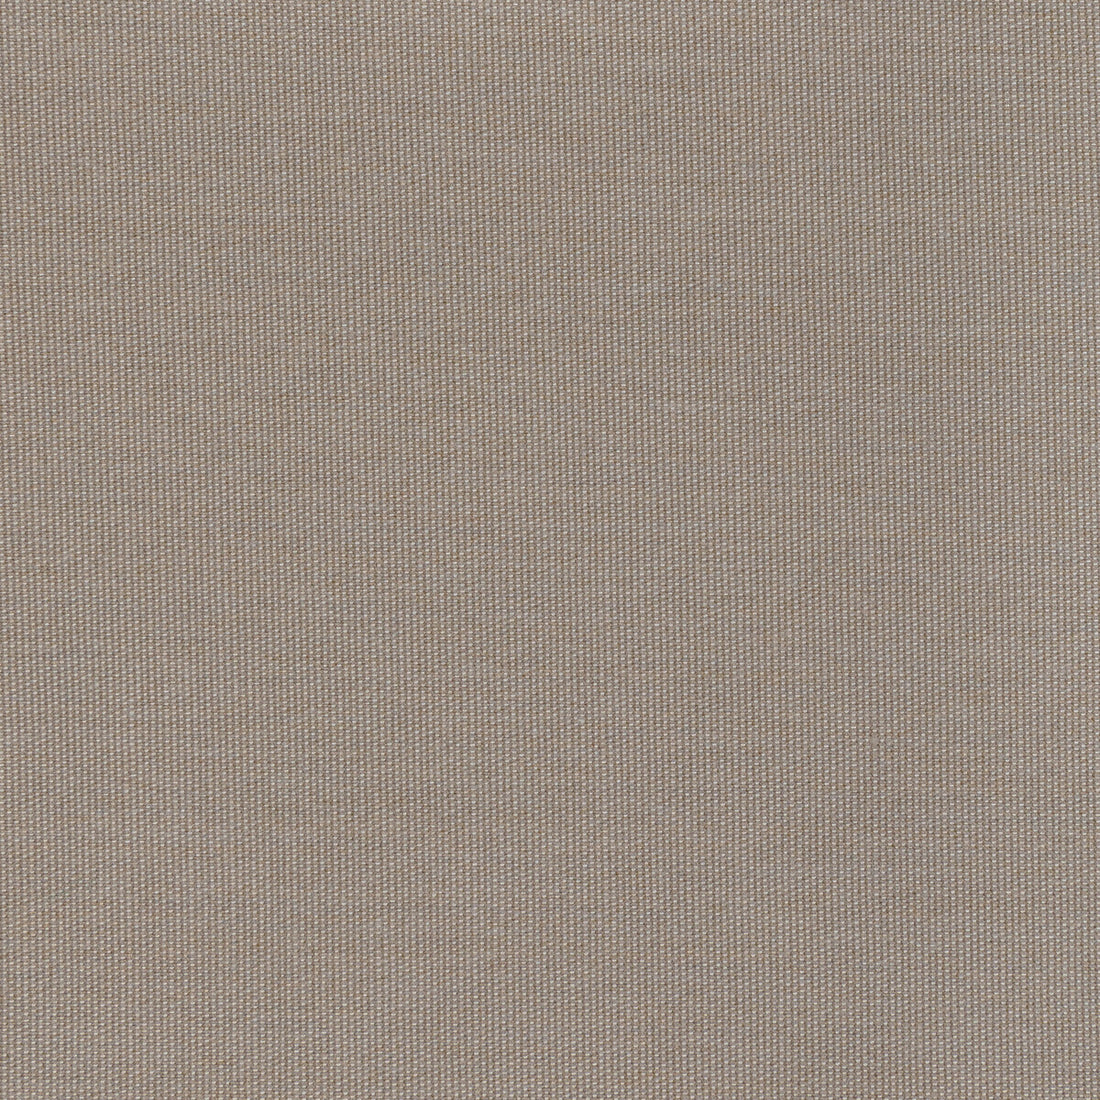 Kravet Basics fabric in 36843-106 color - pattern 36843.106.0 - by Kravet Basics in the Indoor / Outdoor collection